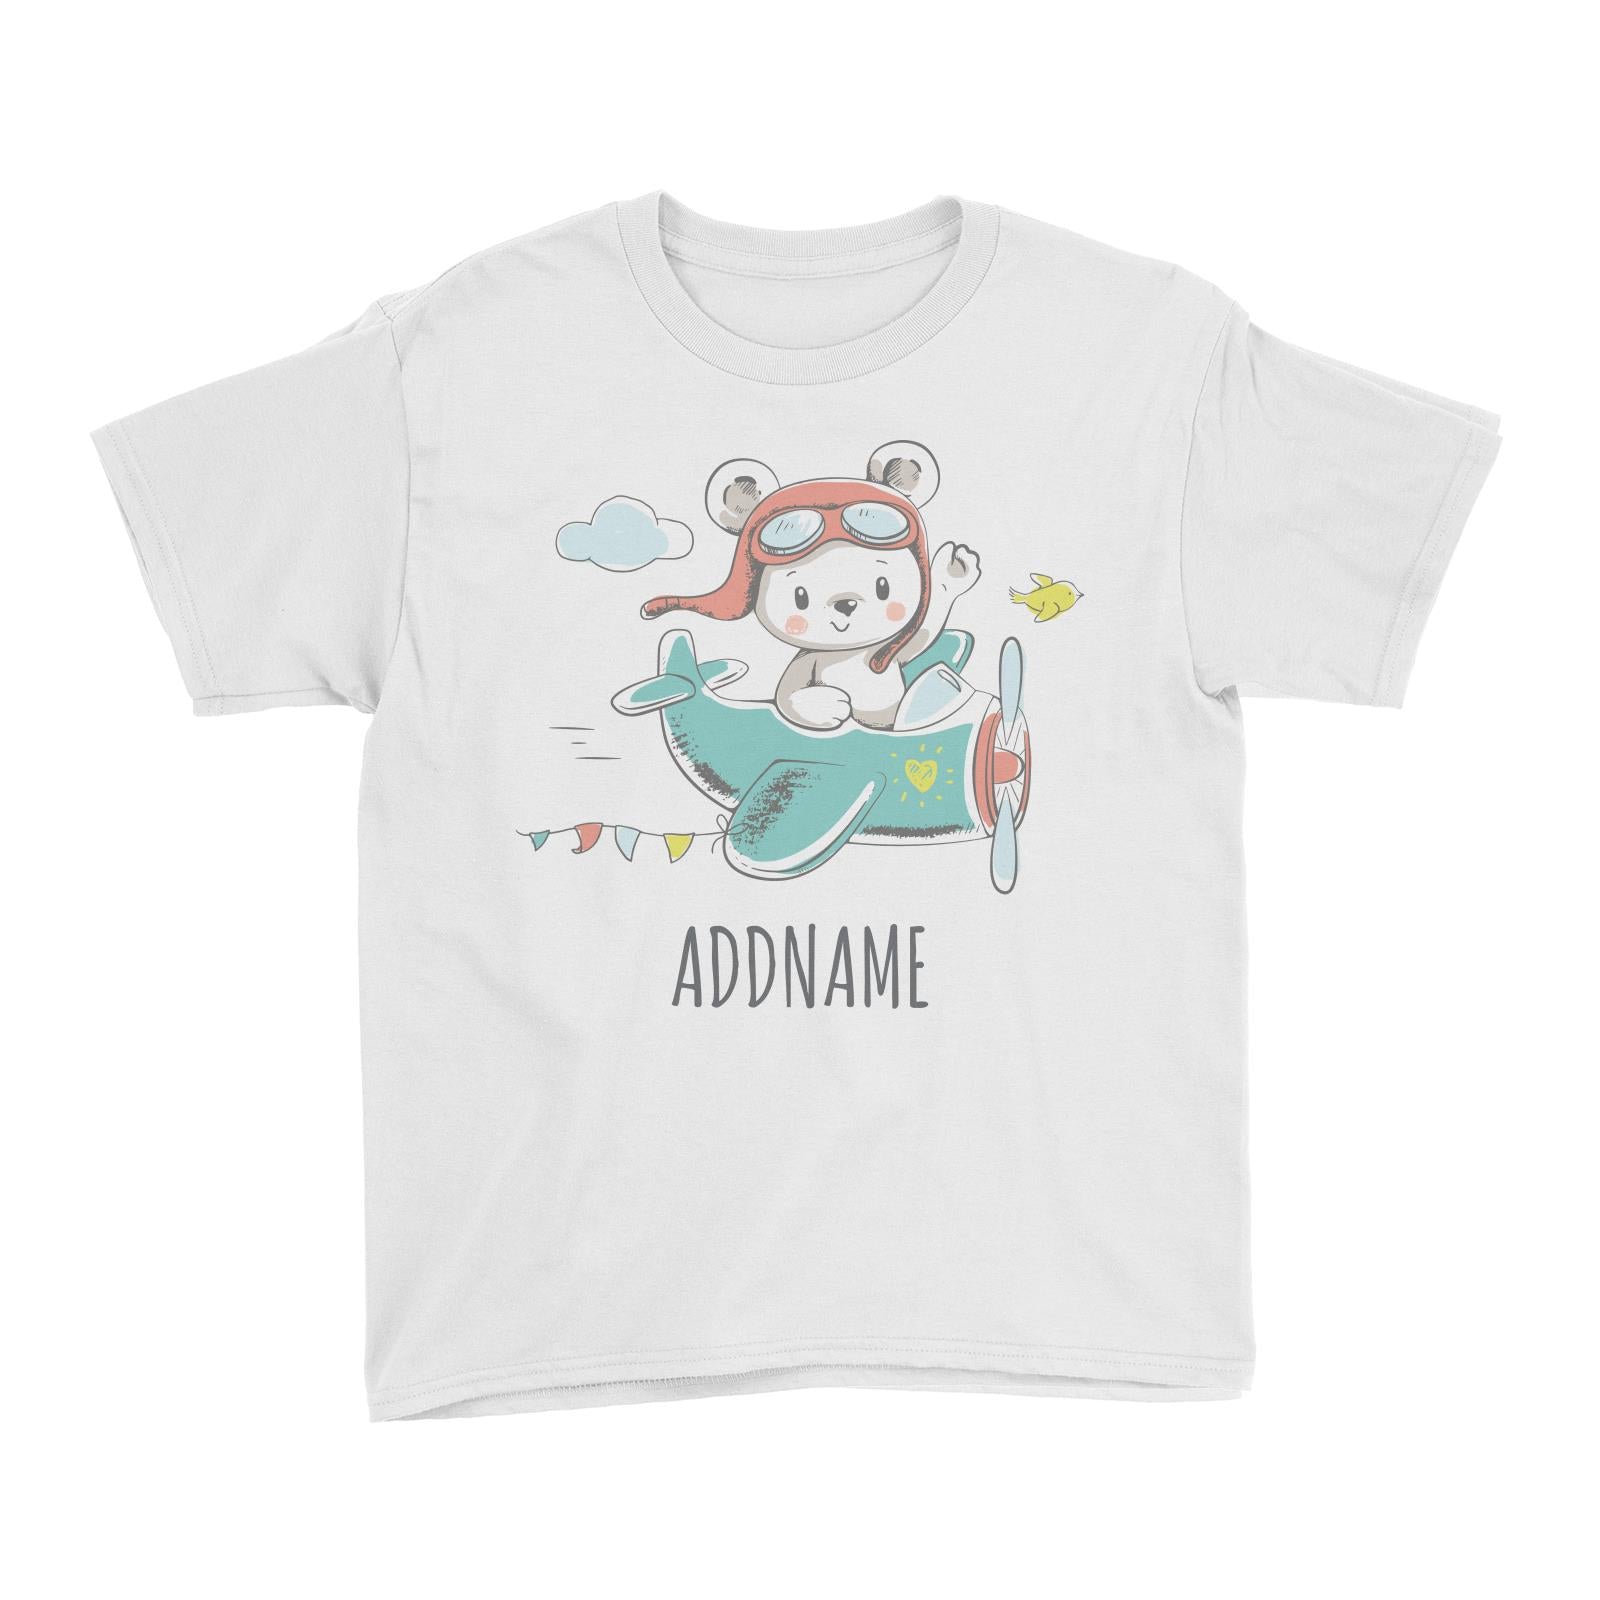 Pilot Bear on Plane White Kid's T-Shirt Personalizable Designs Cute Sweet Animal For Boys Occupation HG